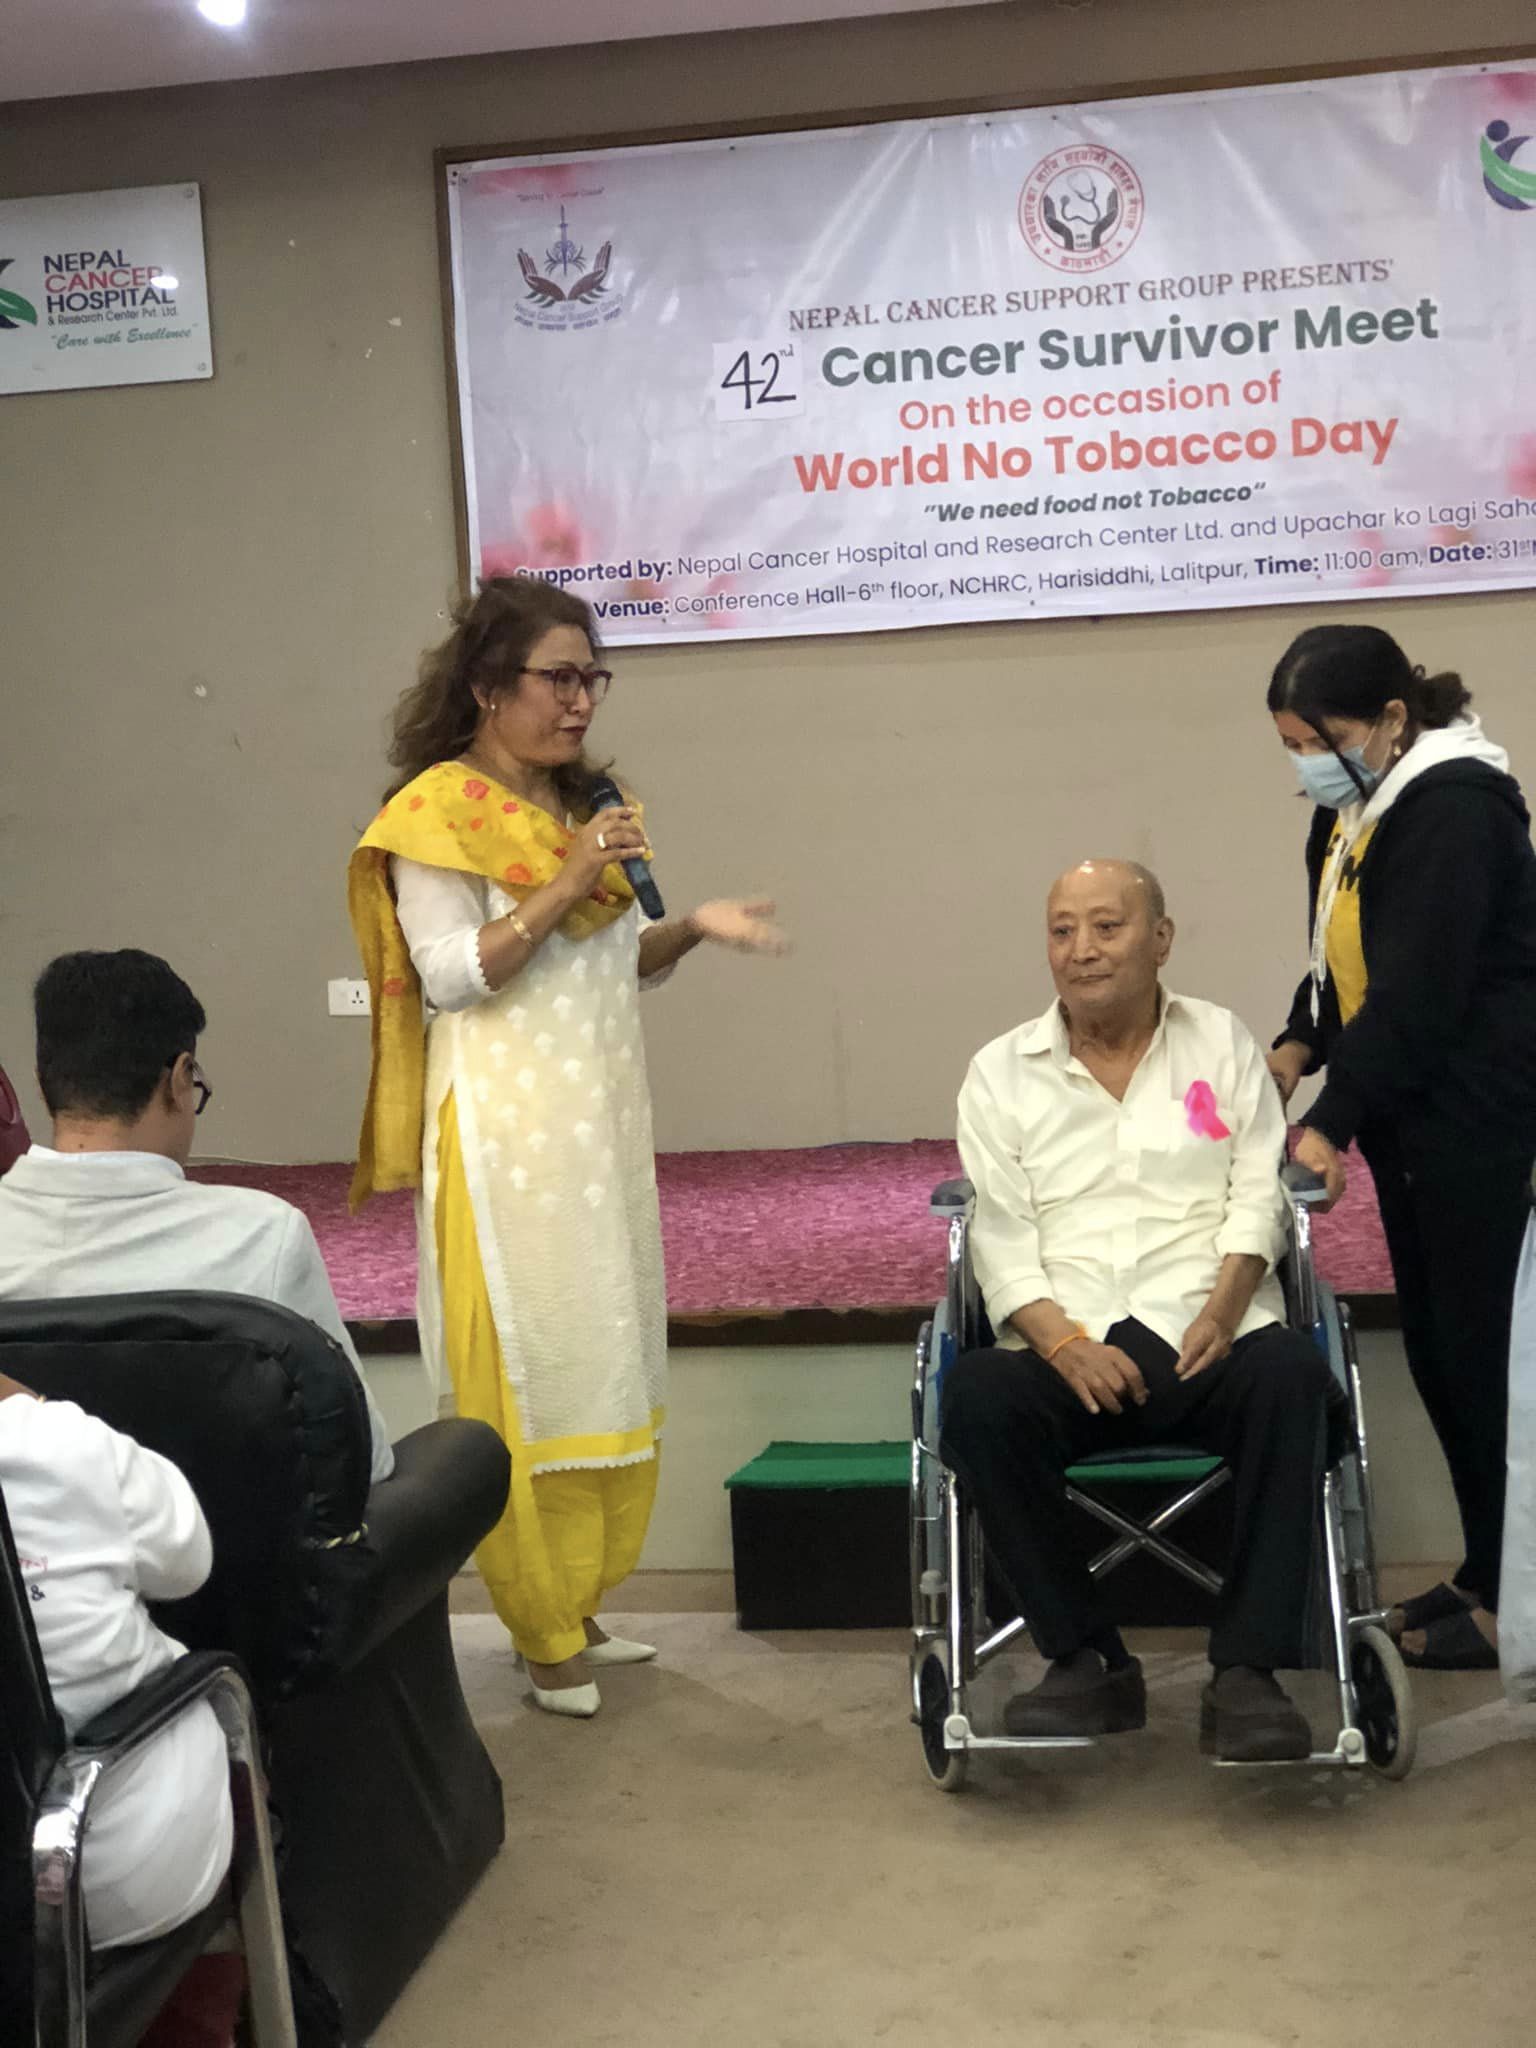 Some glimpse of cancer survivor meet on  the occasion of World no  tobacco day